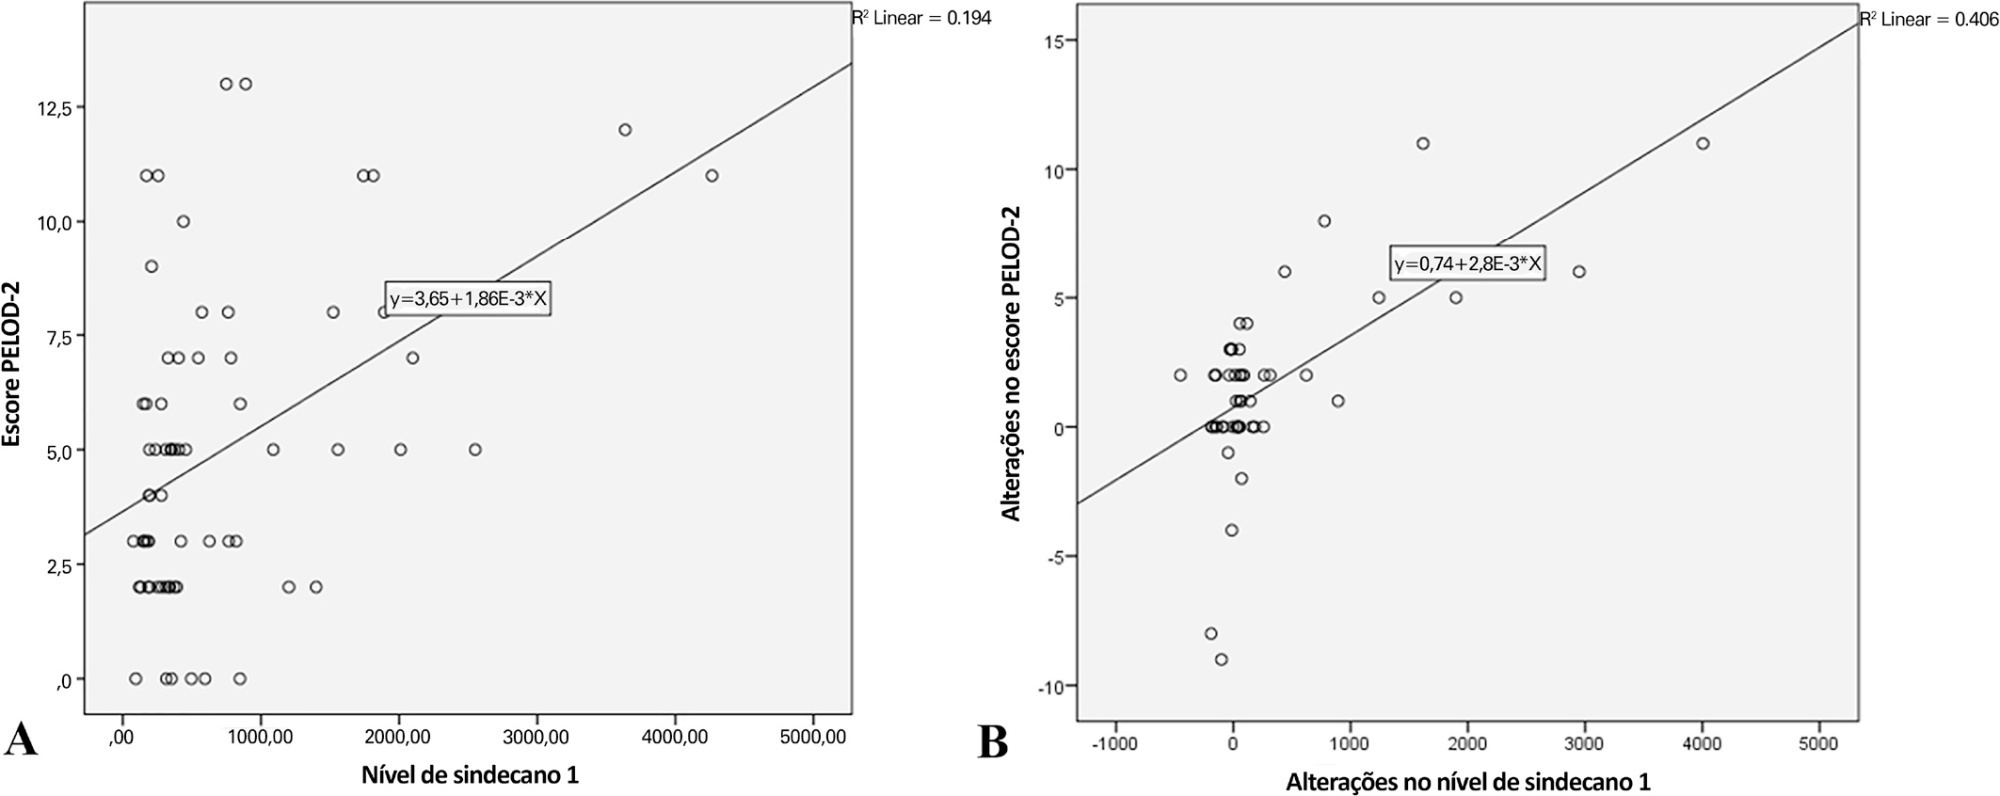 Correlation between syndecan-1 level and PELOD-2 score and mortality in pediatric sepsis